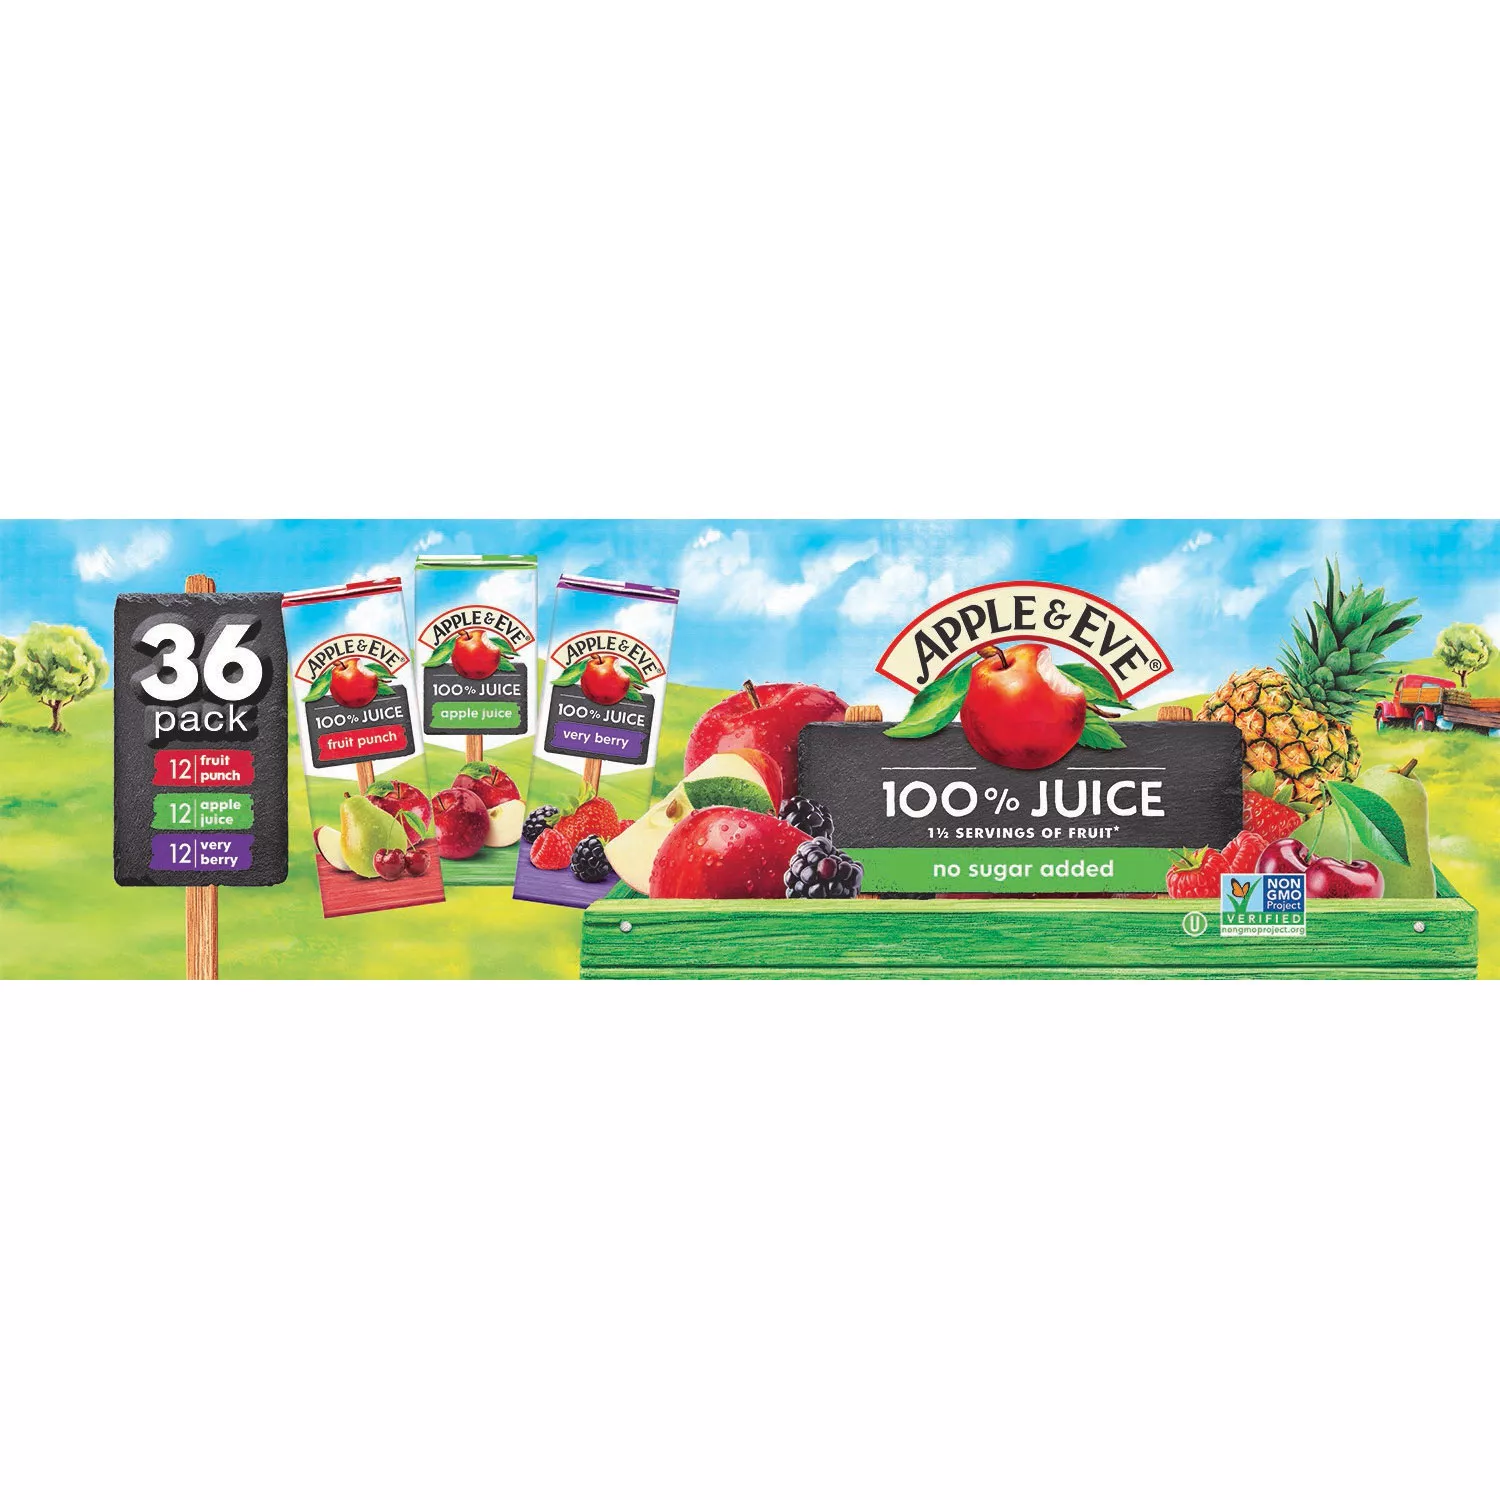 Apple and Eve 100% Juice Variety Pack (6.75oz / 36pk)